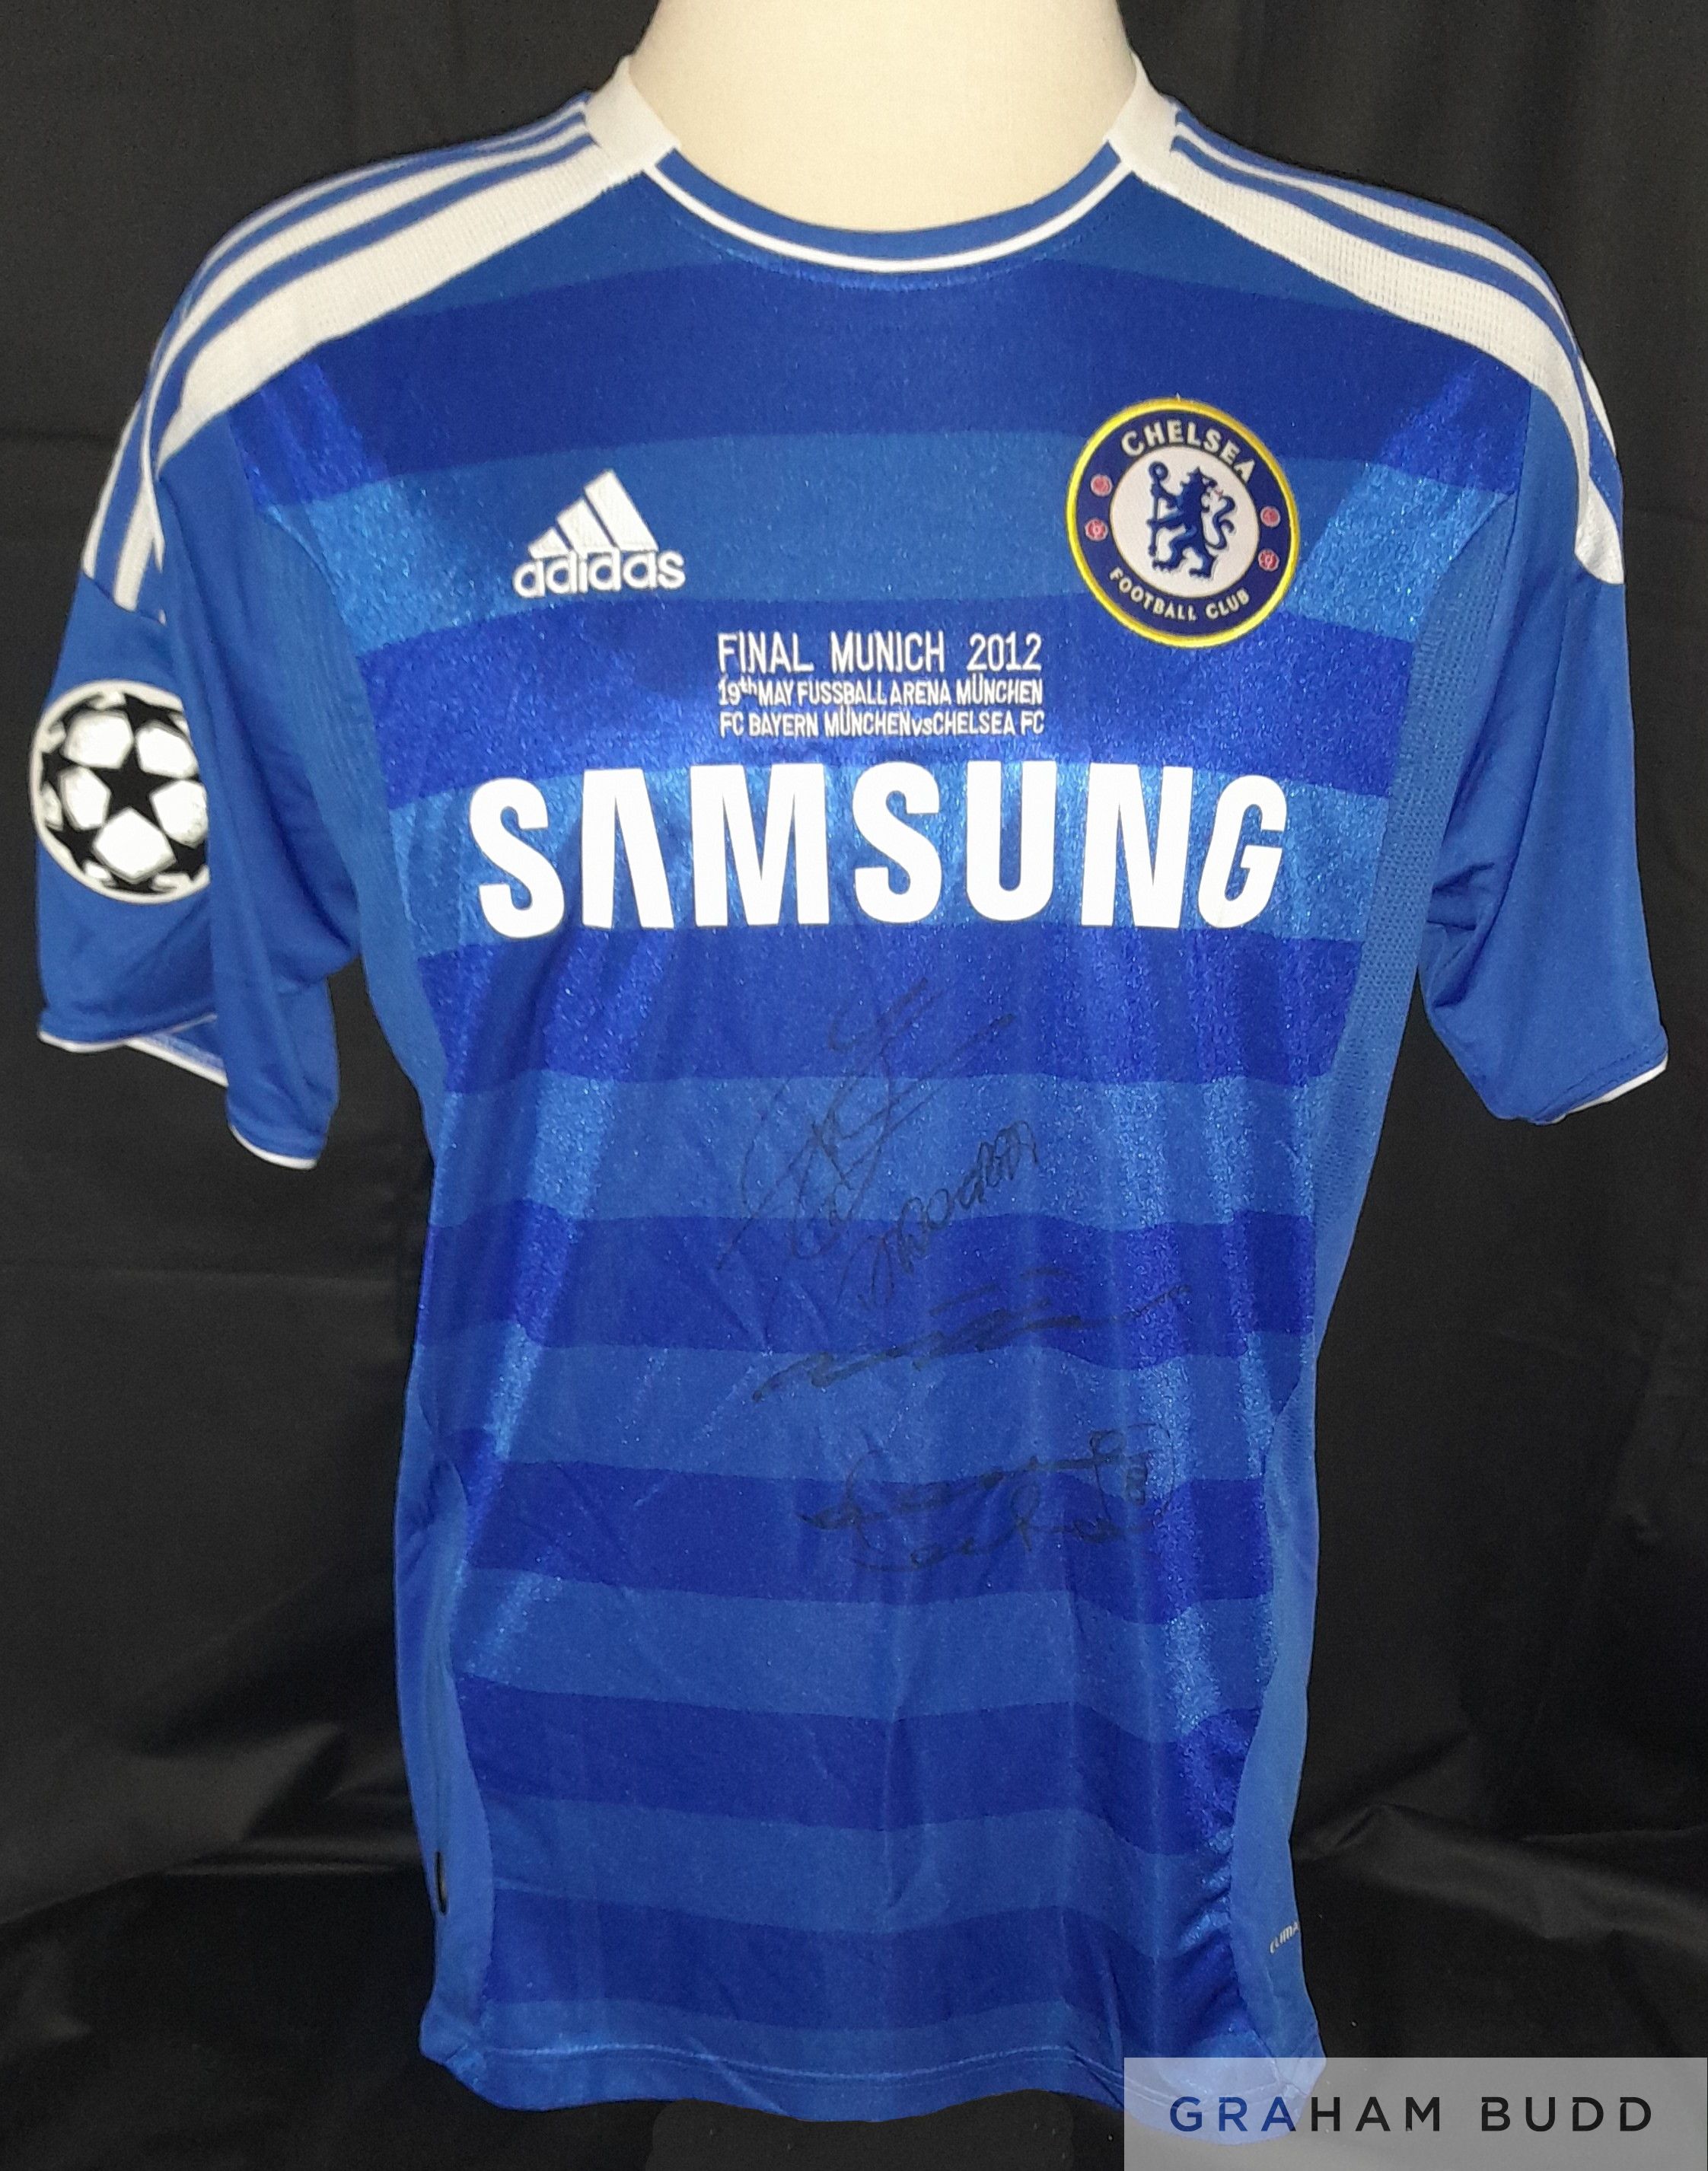 Chelsea 2012 Champions League winners embroidered, signed shirt by captain John Terry, Frank Lampard